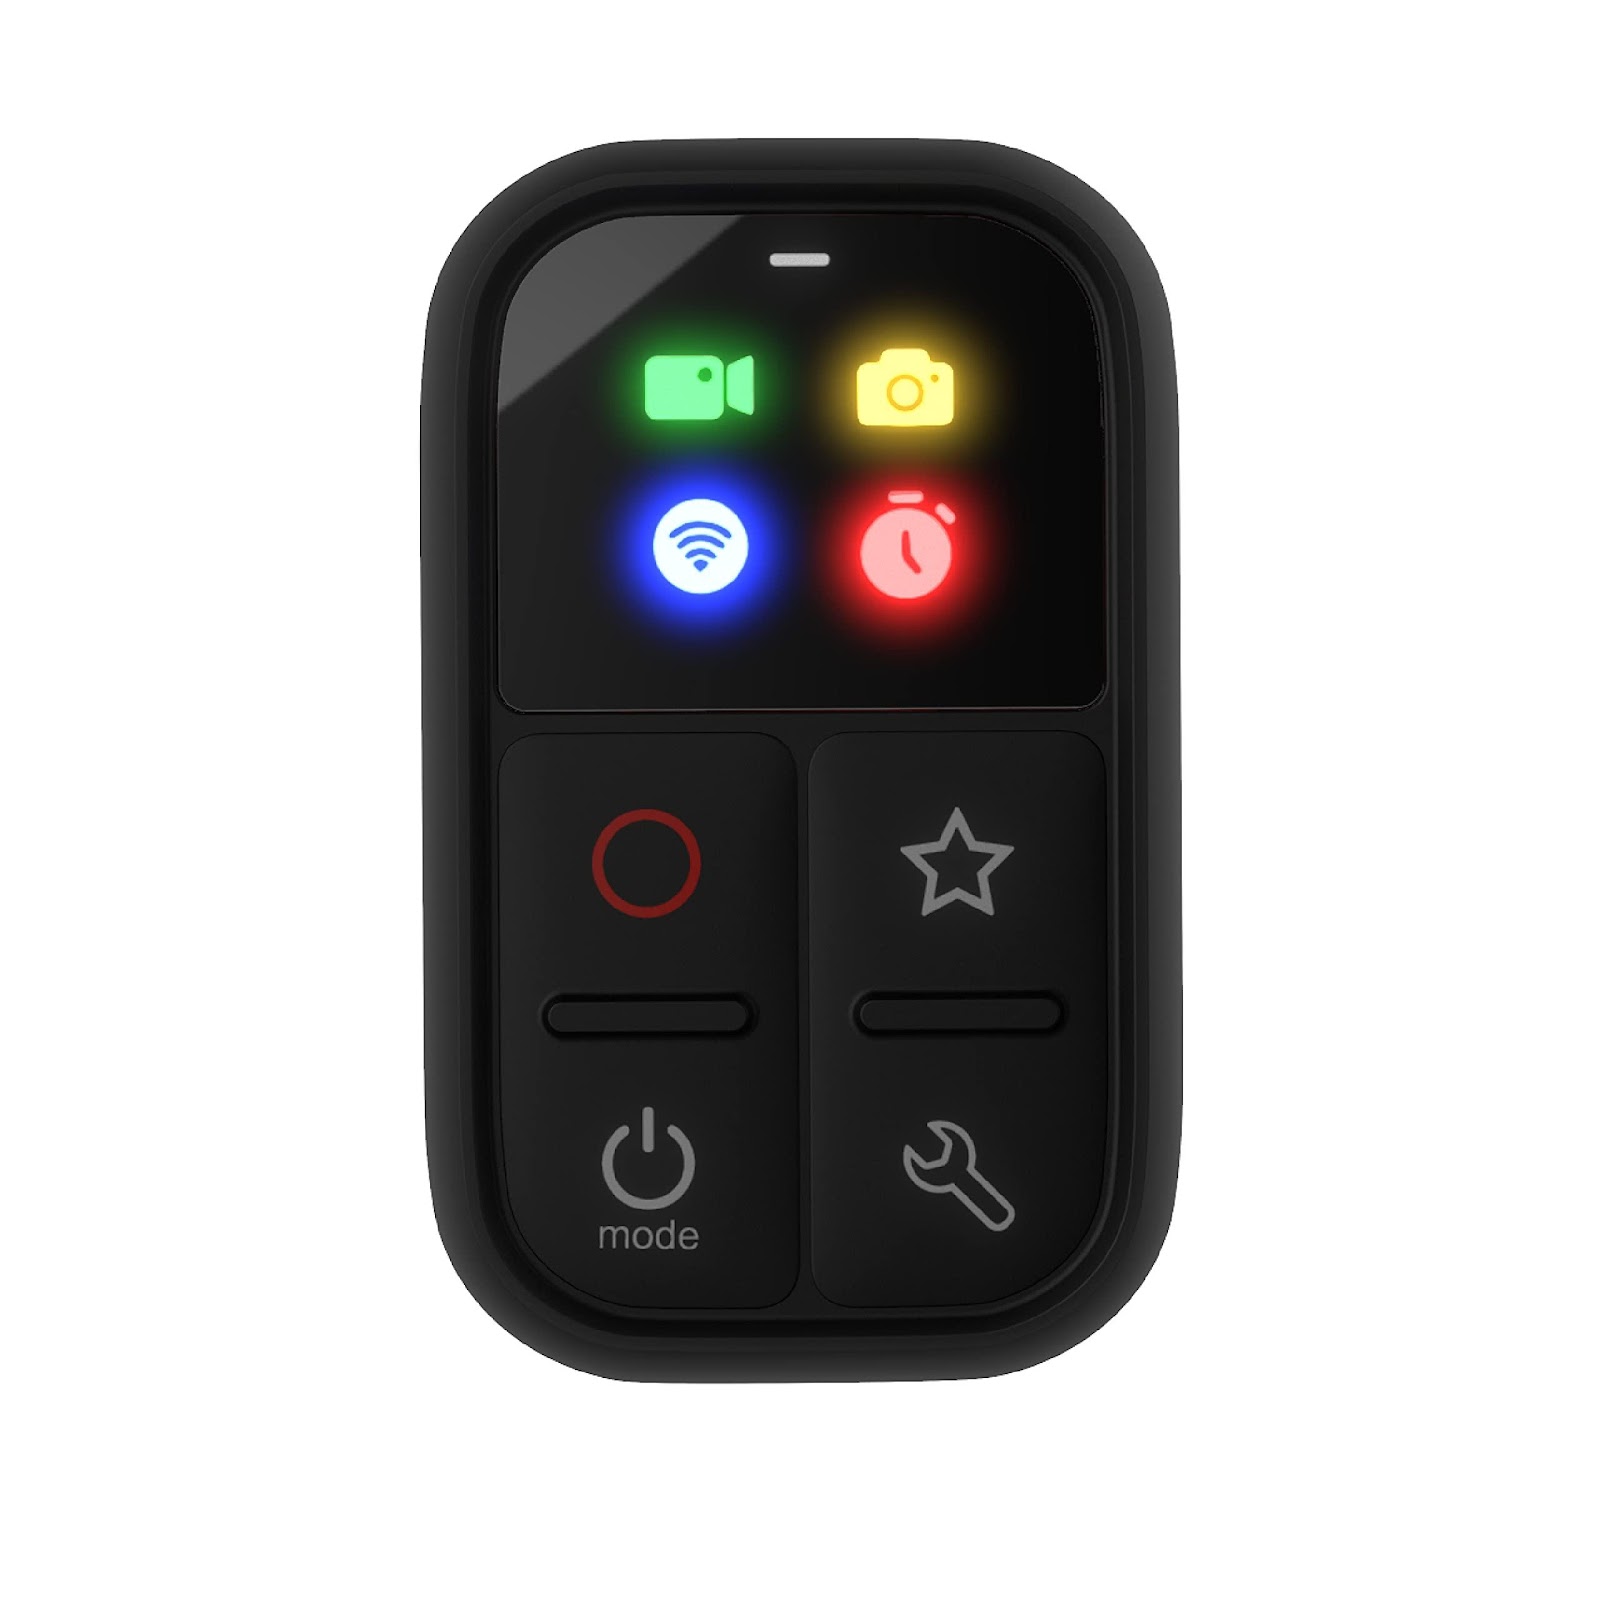 YOCTOP Smart Remote Control for GoPro